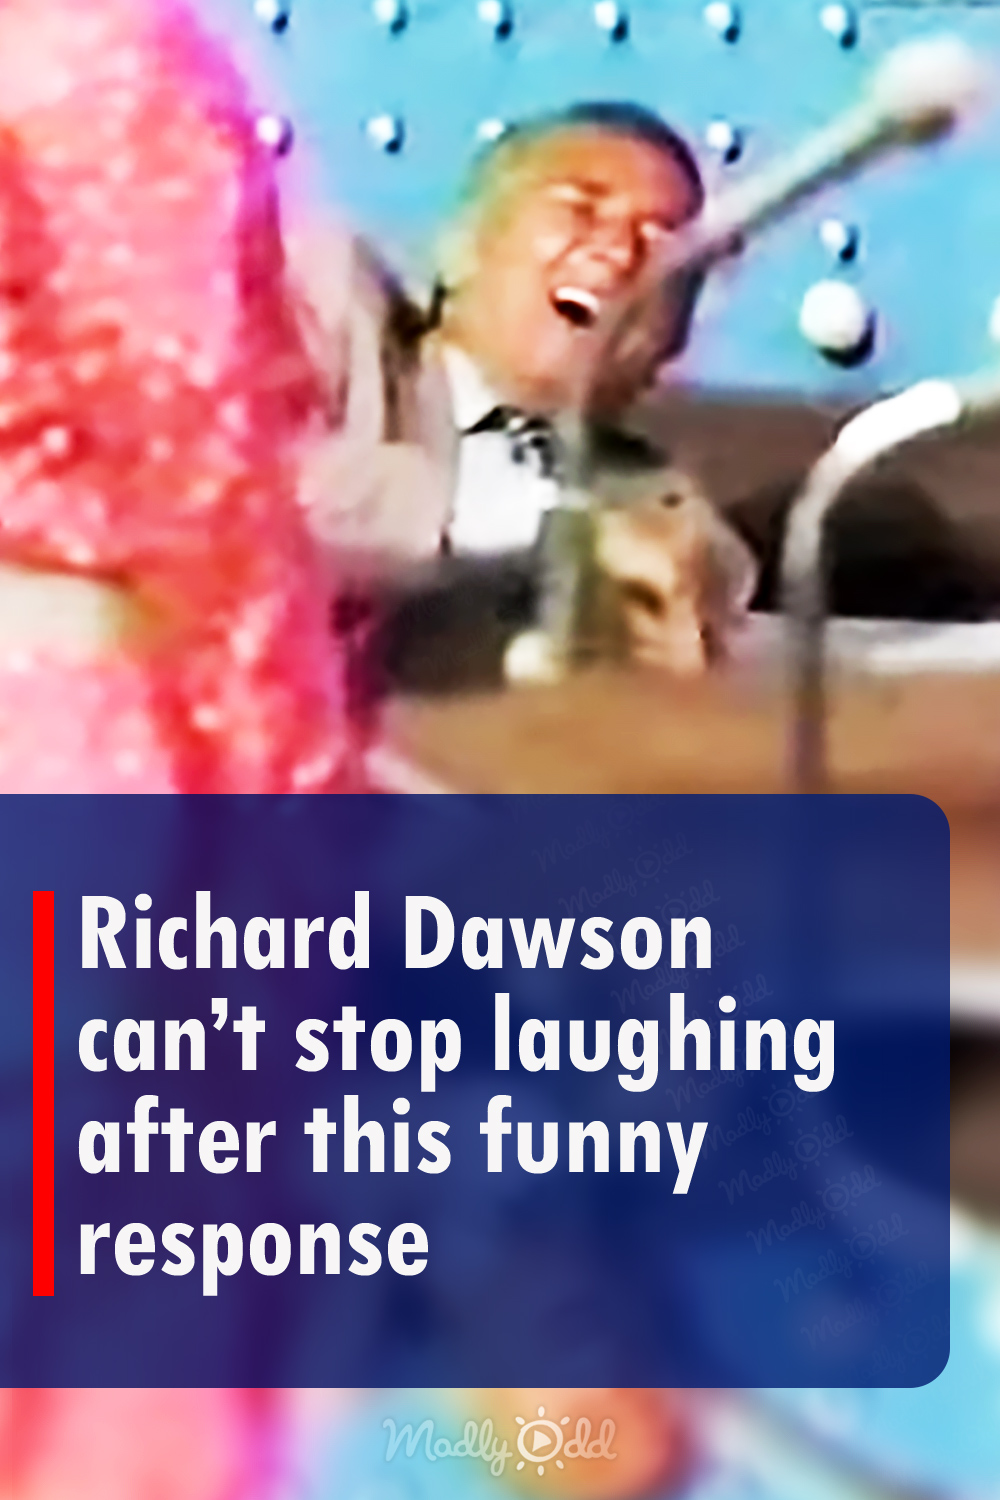 Richard Dawson can’t stop laughing after this funny response